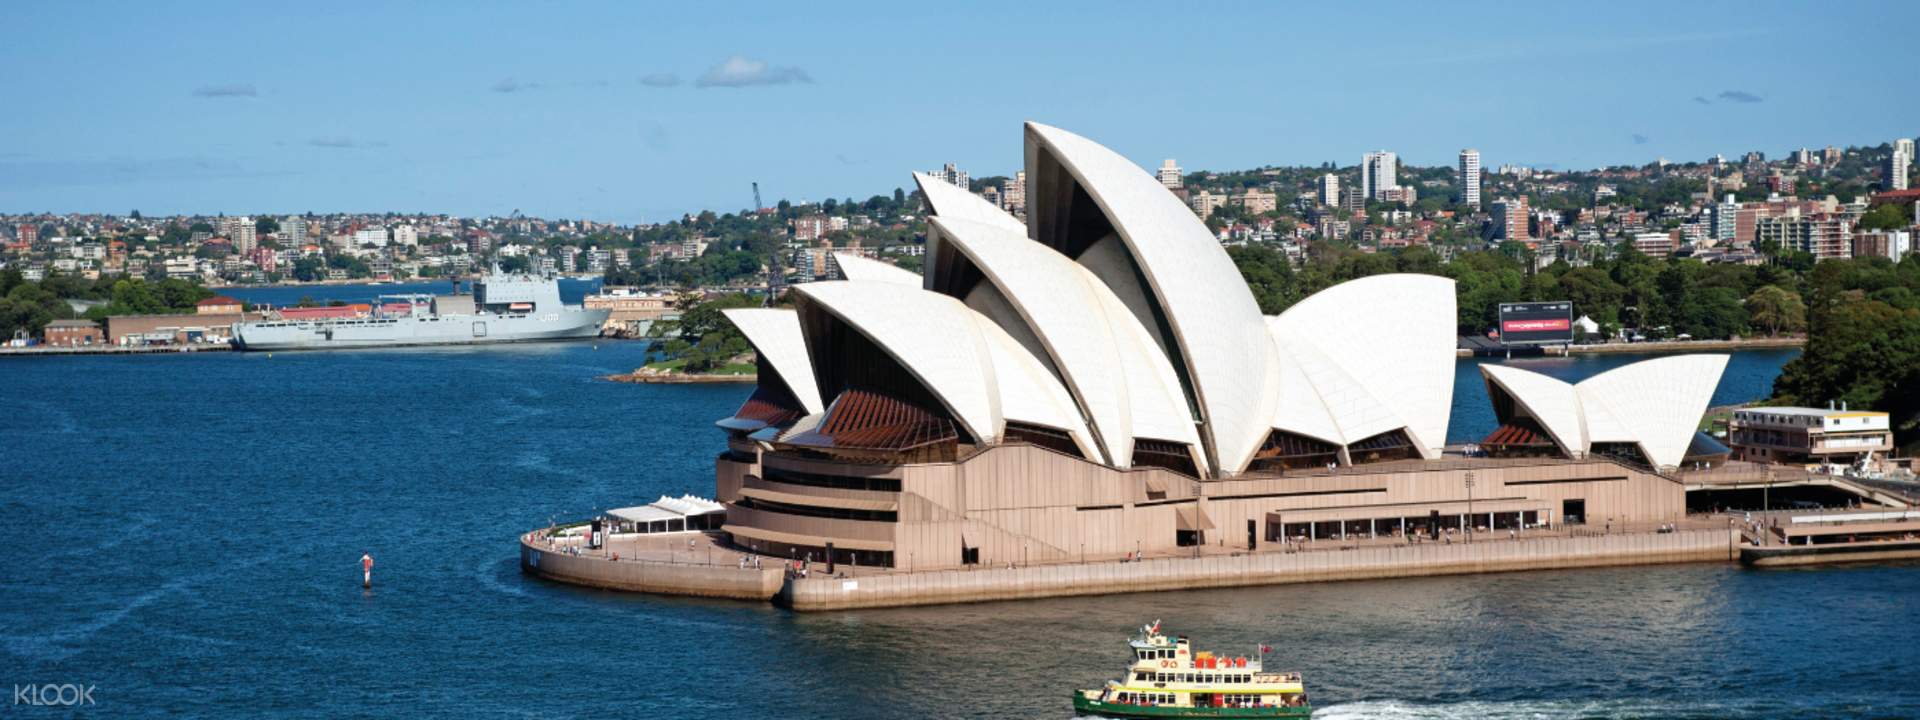 sydney opera house guided tour